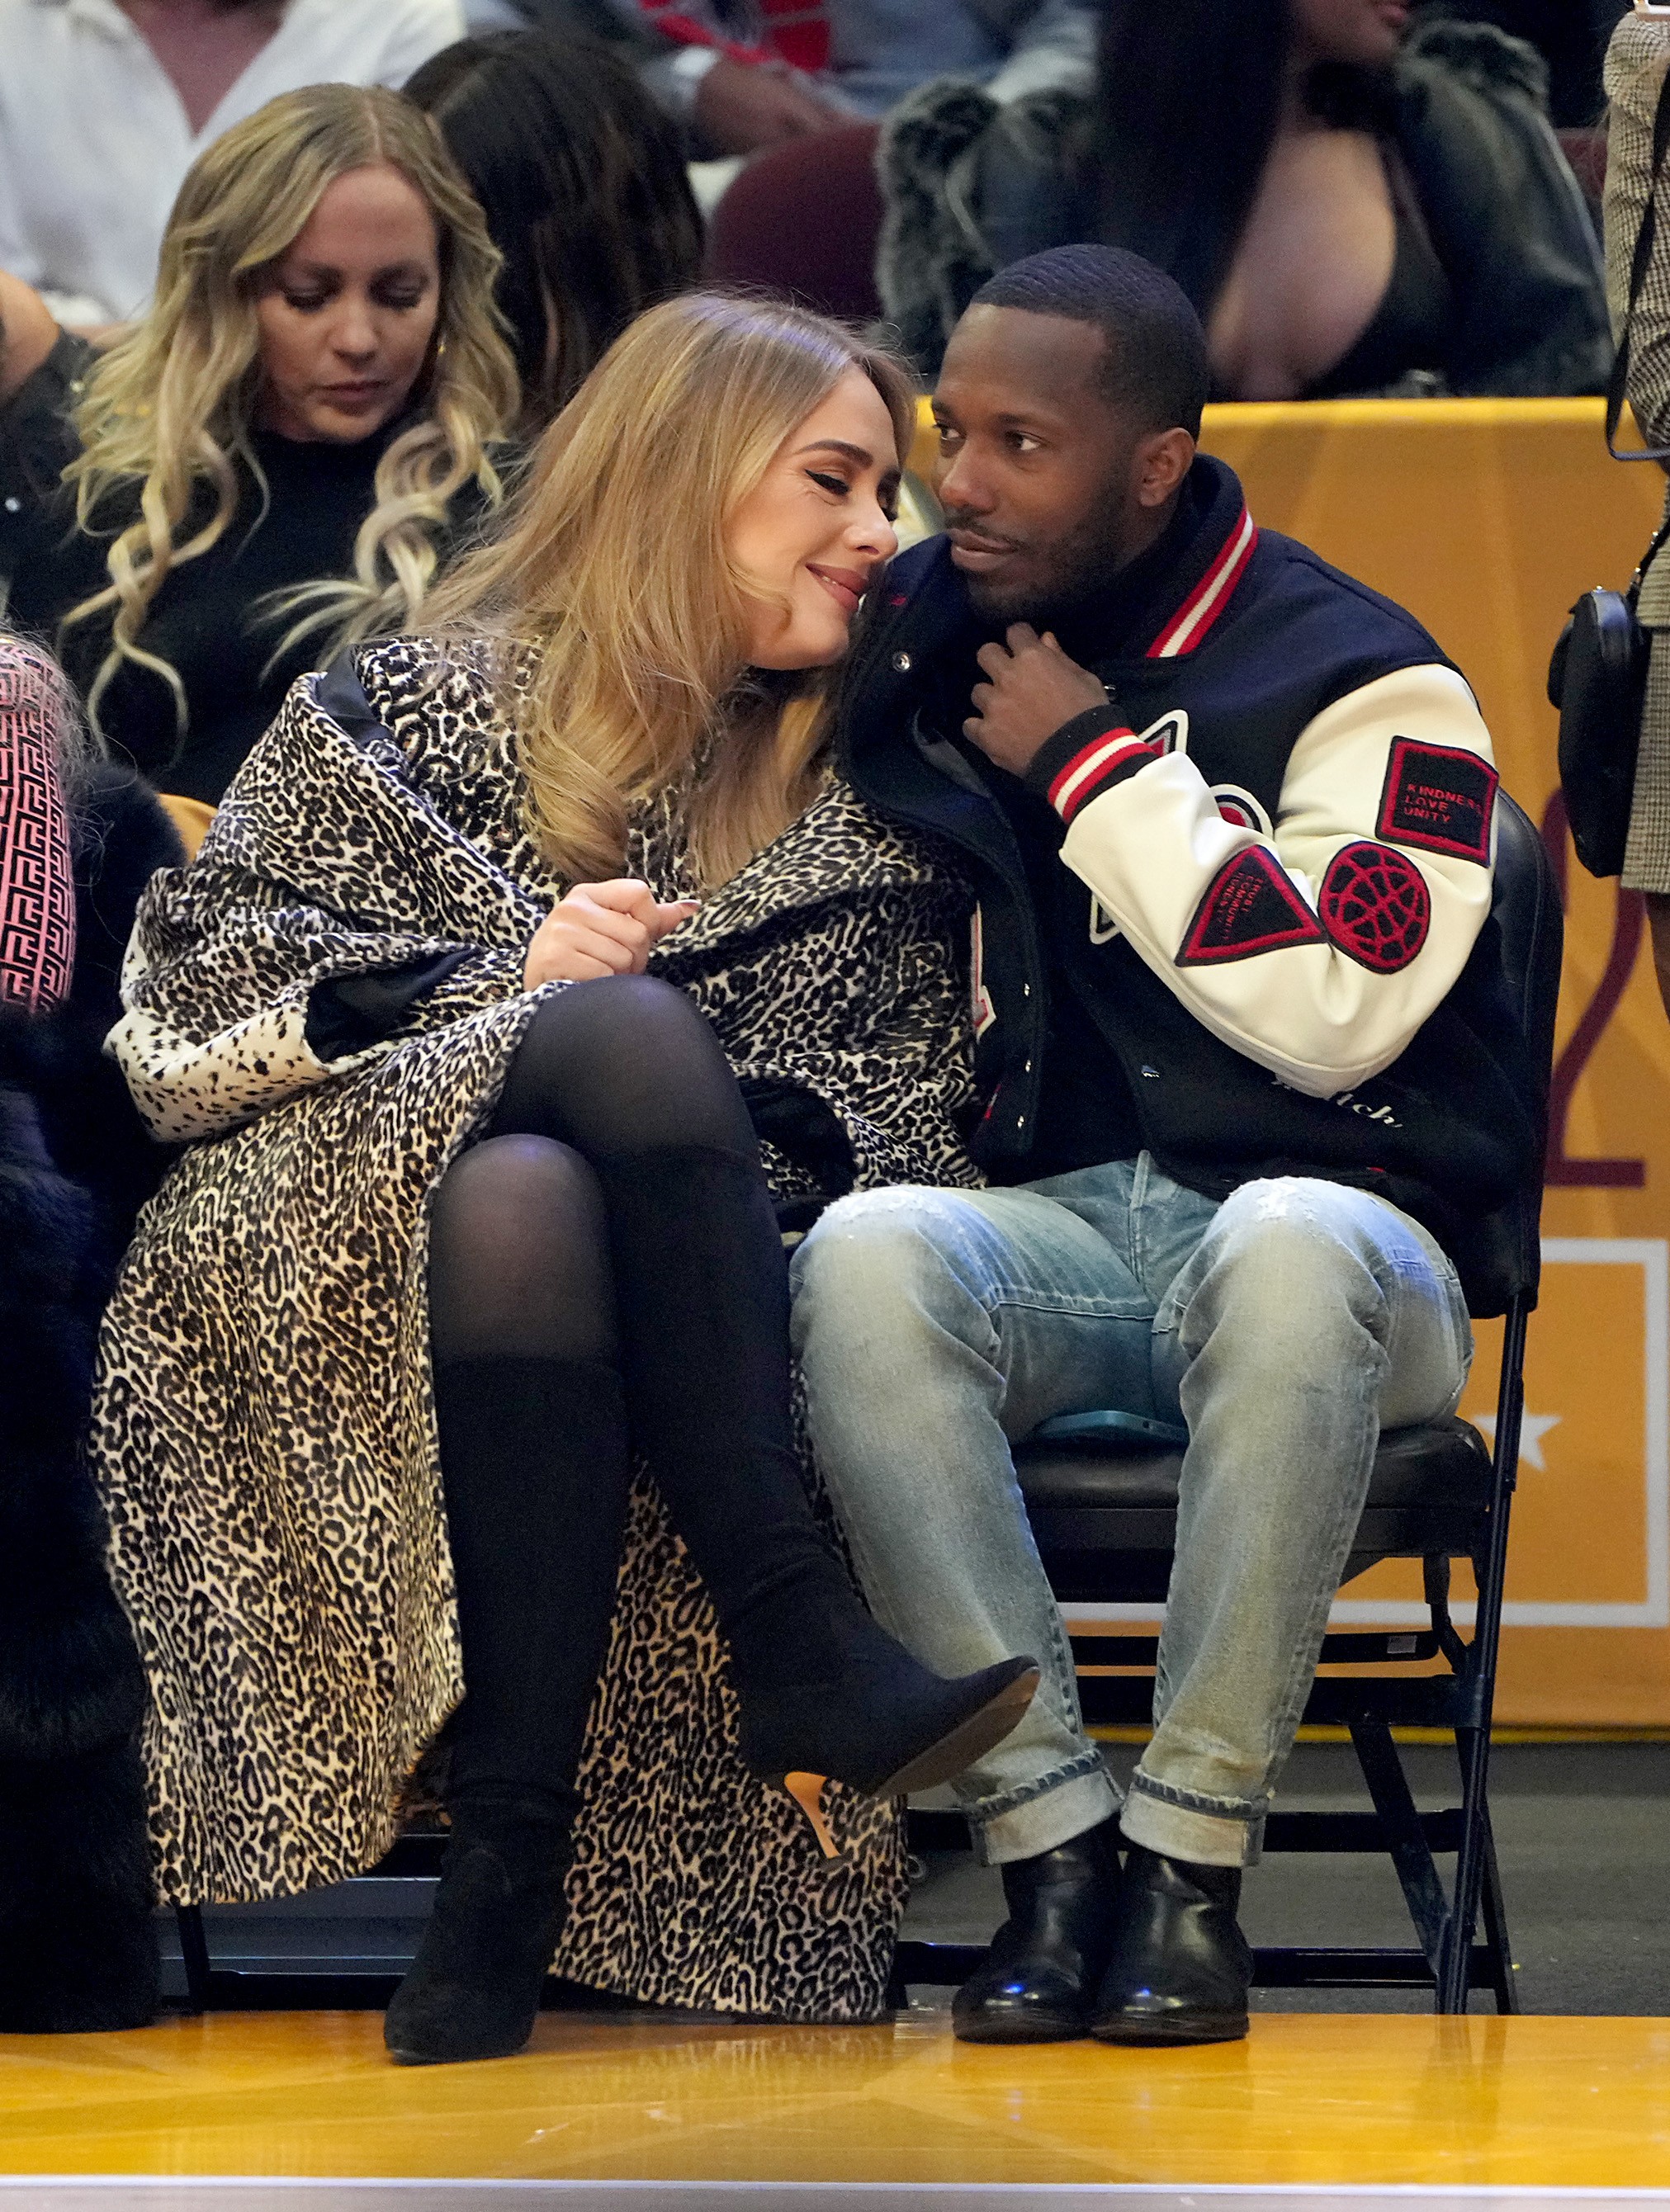 CLEVELAND, OHIO - FEBRUARY 20: (L-R) Adele and Rich Paul attend the 2022 NBA All-Star Game at Rocket Mortgage Fieldhouse on February 20, 2022 in Cleveland, Ohio. NOTE TO USER: User expressly acknowledges and agrees that, by downloading and or using this p (Foto: Getty Images)